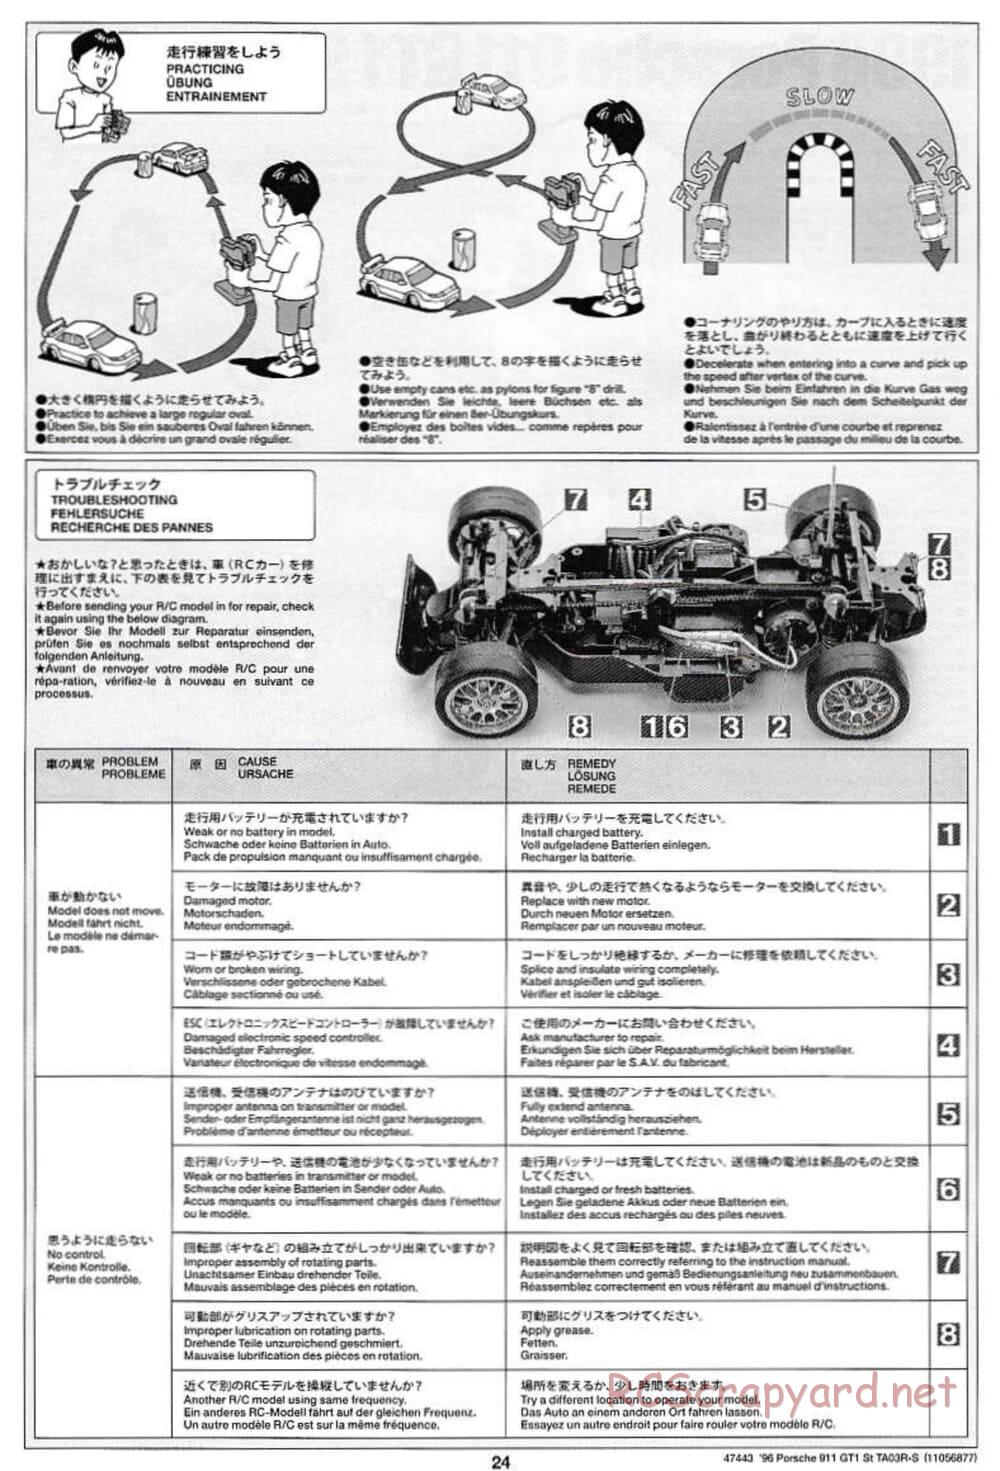 Tamiya - Porsche 911 GT1 Street - TA-03RS Chassis - Manual - Page 24